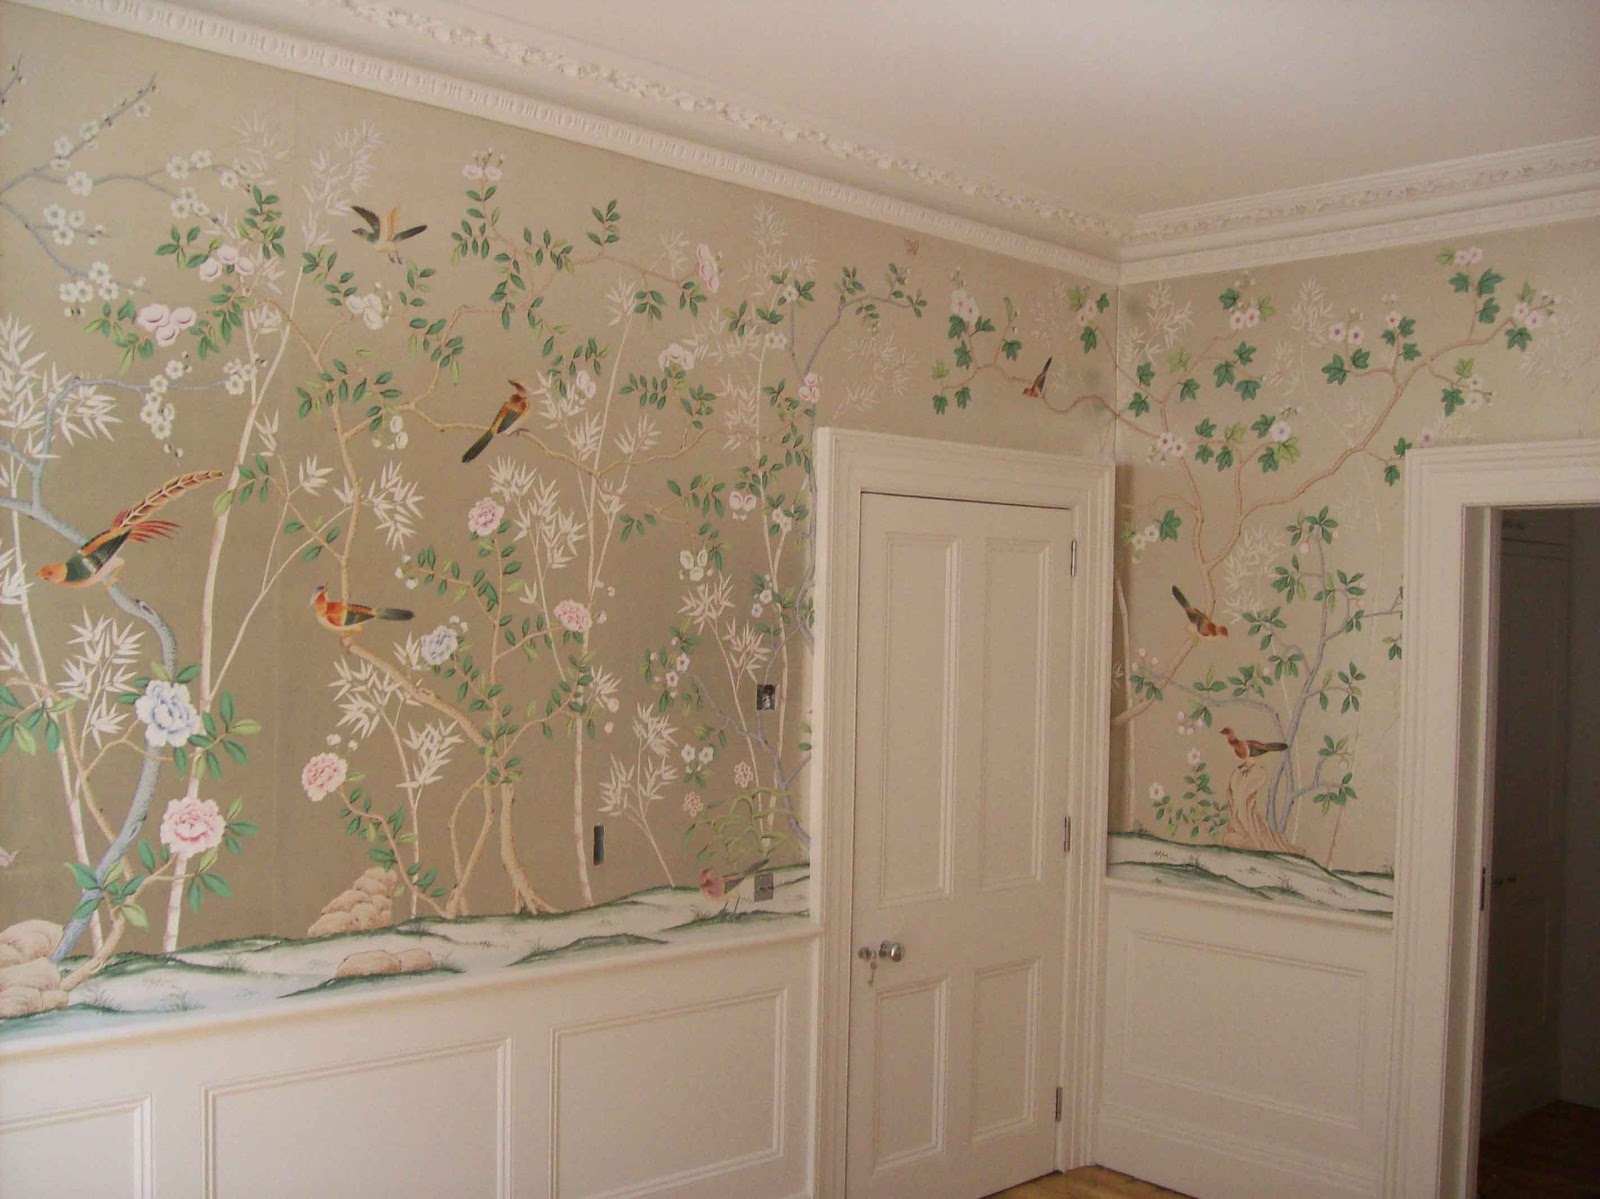 Gorgeous Green Dining Room De Gournay Wallpaper Takes Center Stage